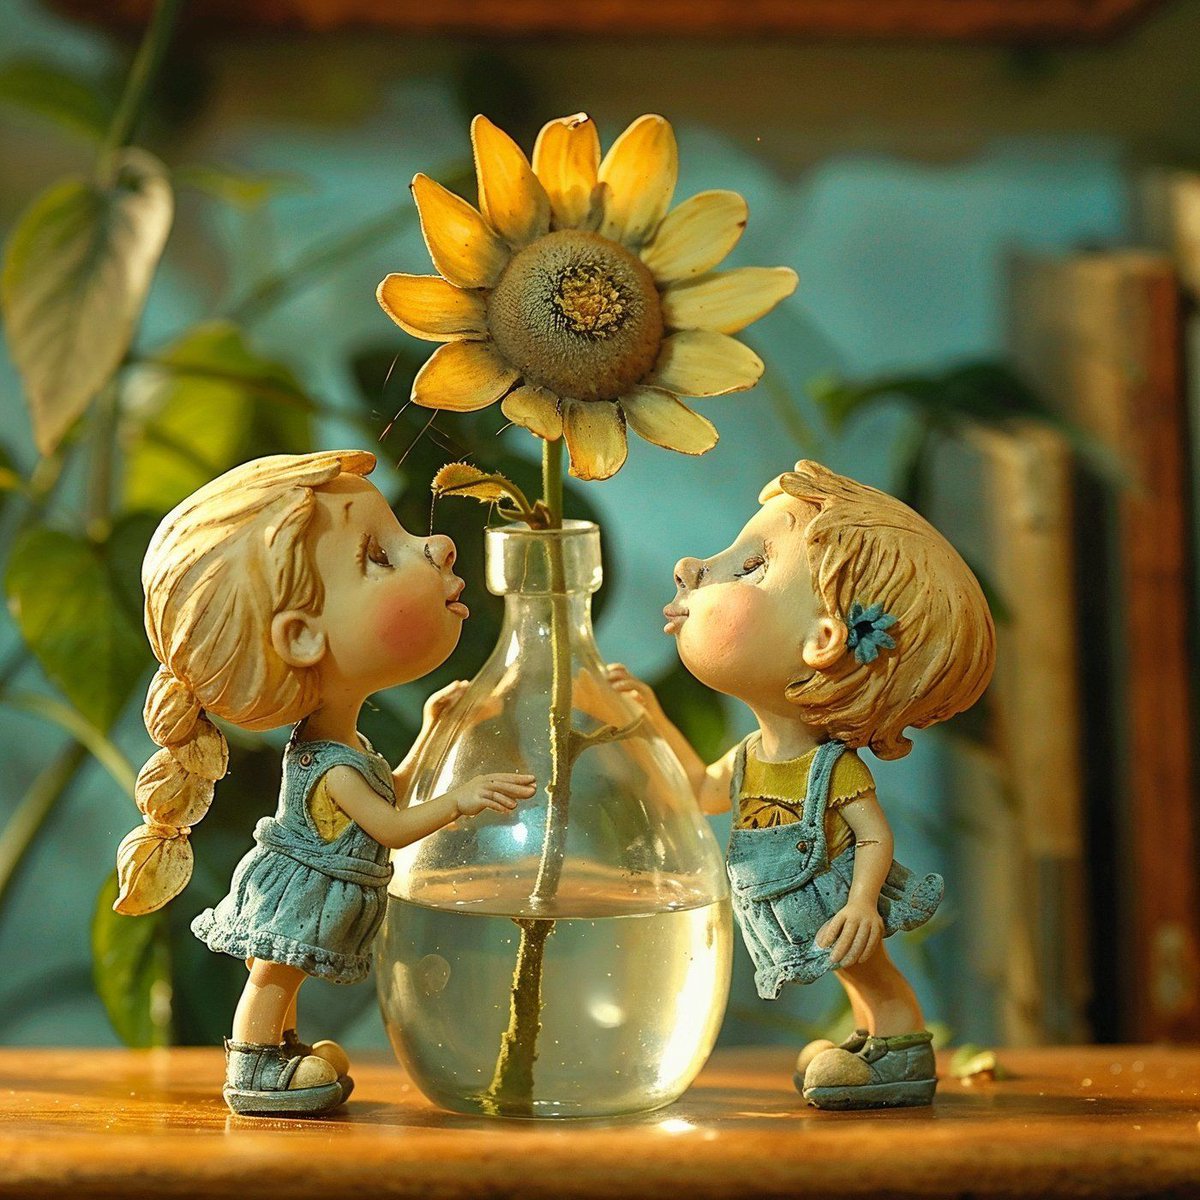 'The Little Sunflower'

Who knew sunflowers could teach life lessons? Taught my niece about nature today, and she blew the cutest kiss to our new sunflower friend! 🌻 #midjourney #ai #portrait #character #postphotography #aicinema #sunflowerkiss